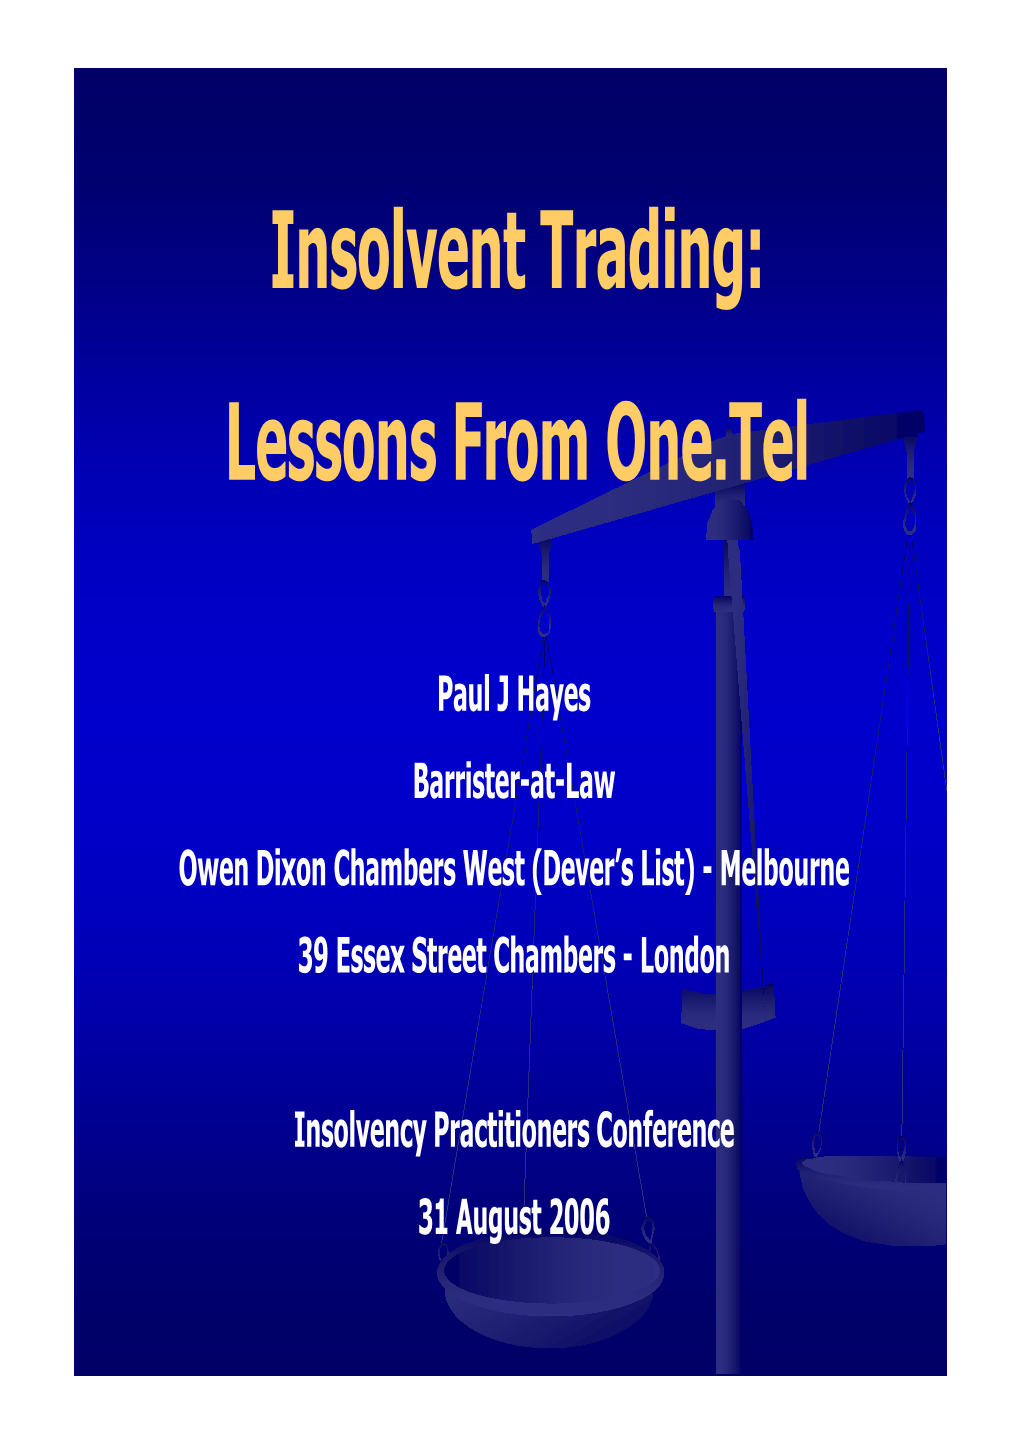 Insolvent Trading: Lessons from One.Tel